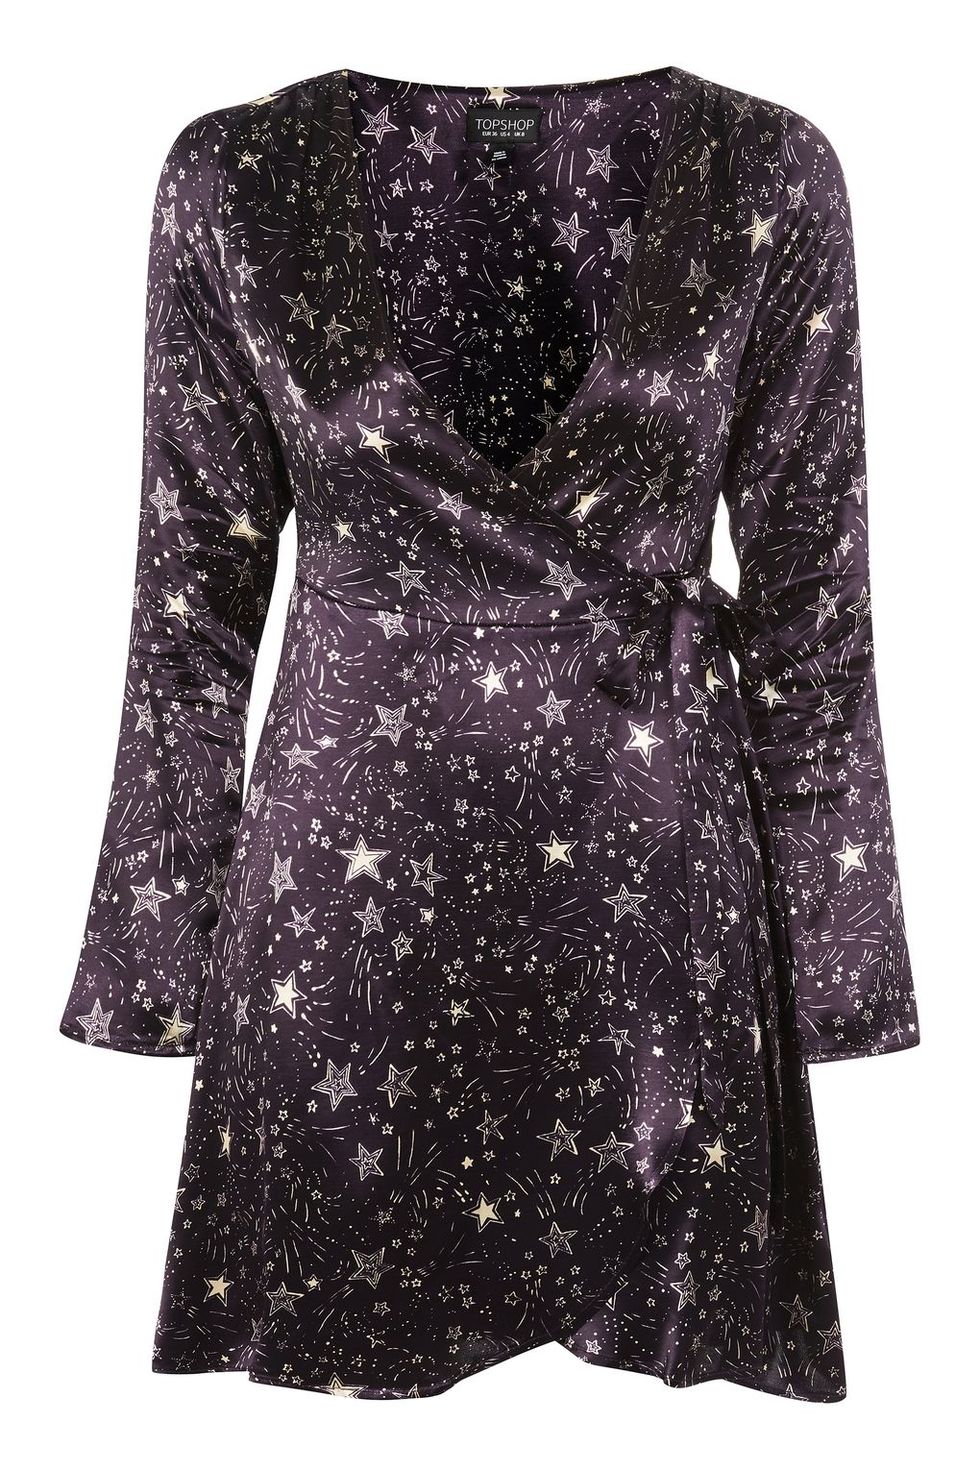 Clothing, Dress, Purple, Sleeve, Cocktail dress, Day dress, Violet, Outerwear, Neck, Blouse, 